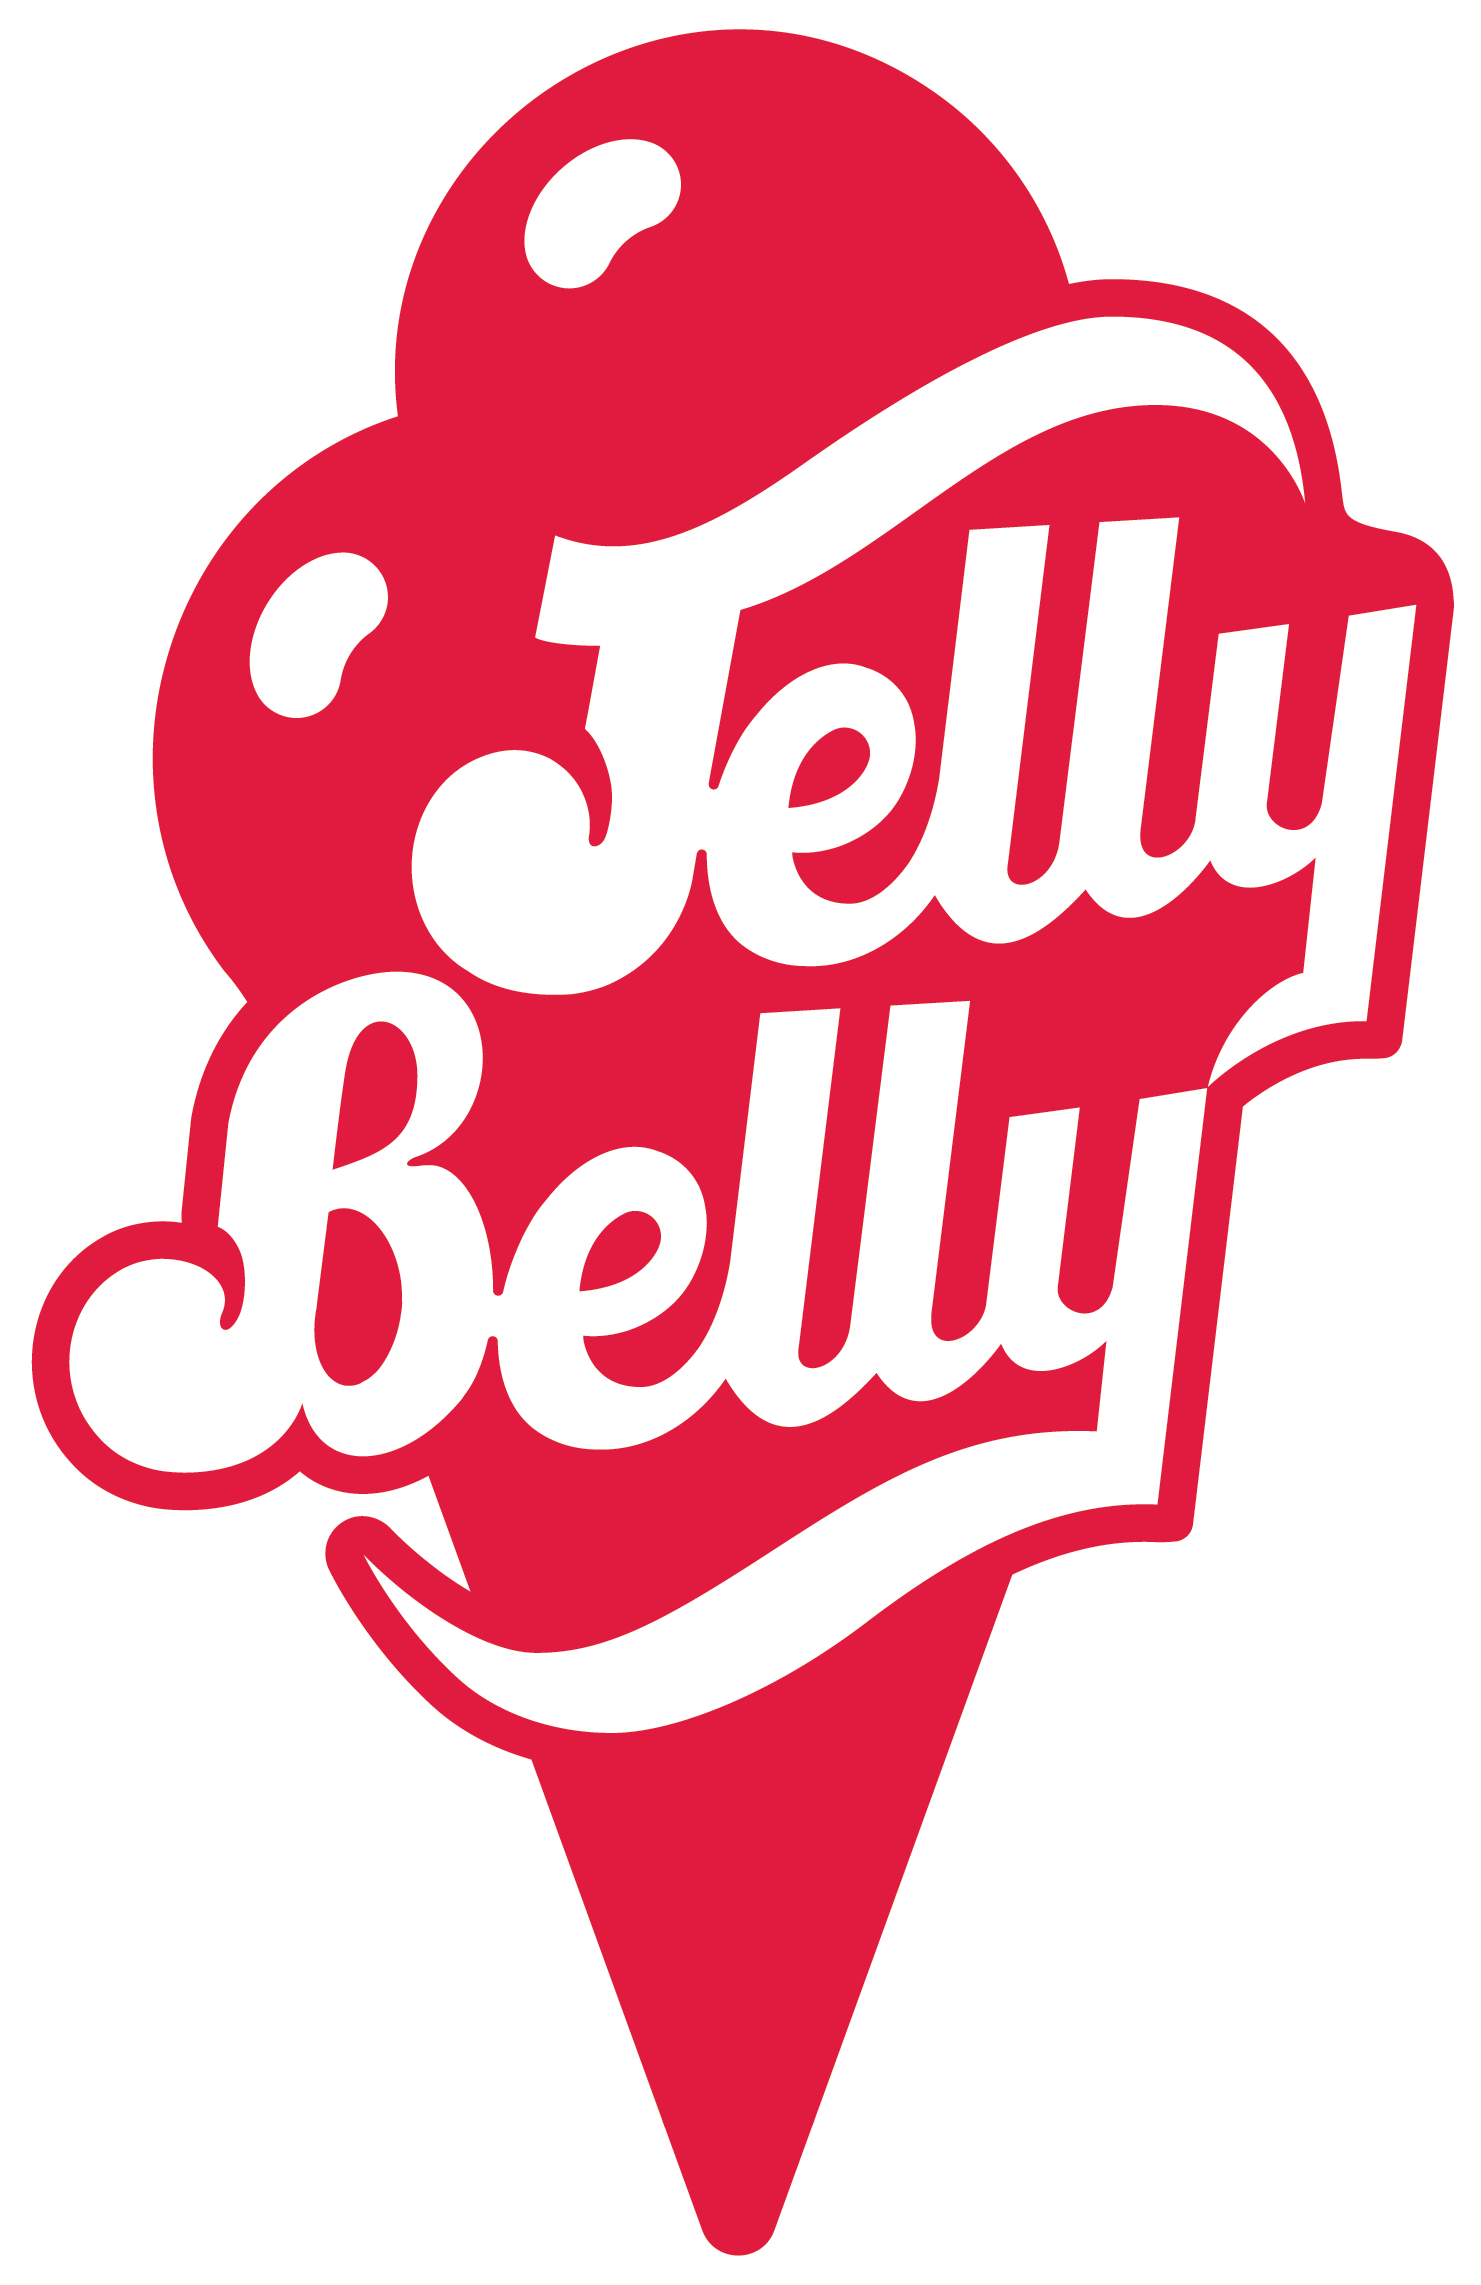 Introducing The Uae's First Jelly Belly Ice Cream Experience - Jelly Belly Green Apple (1481x2285)